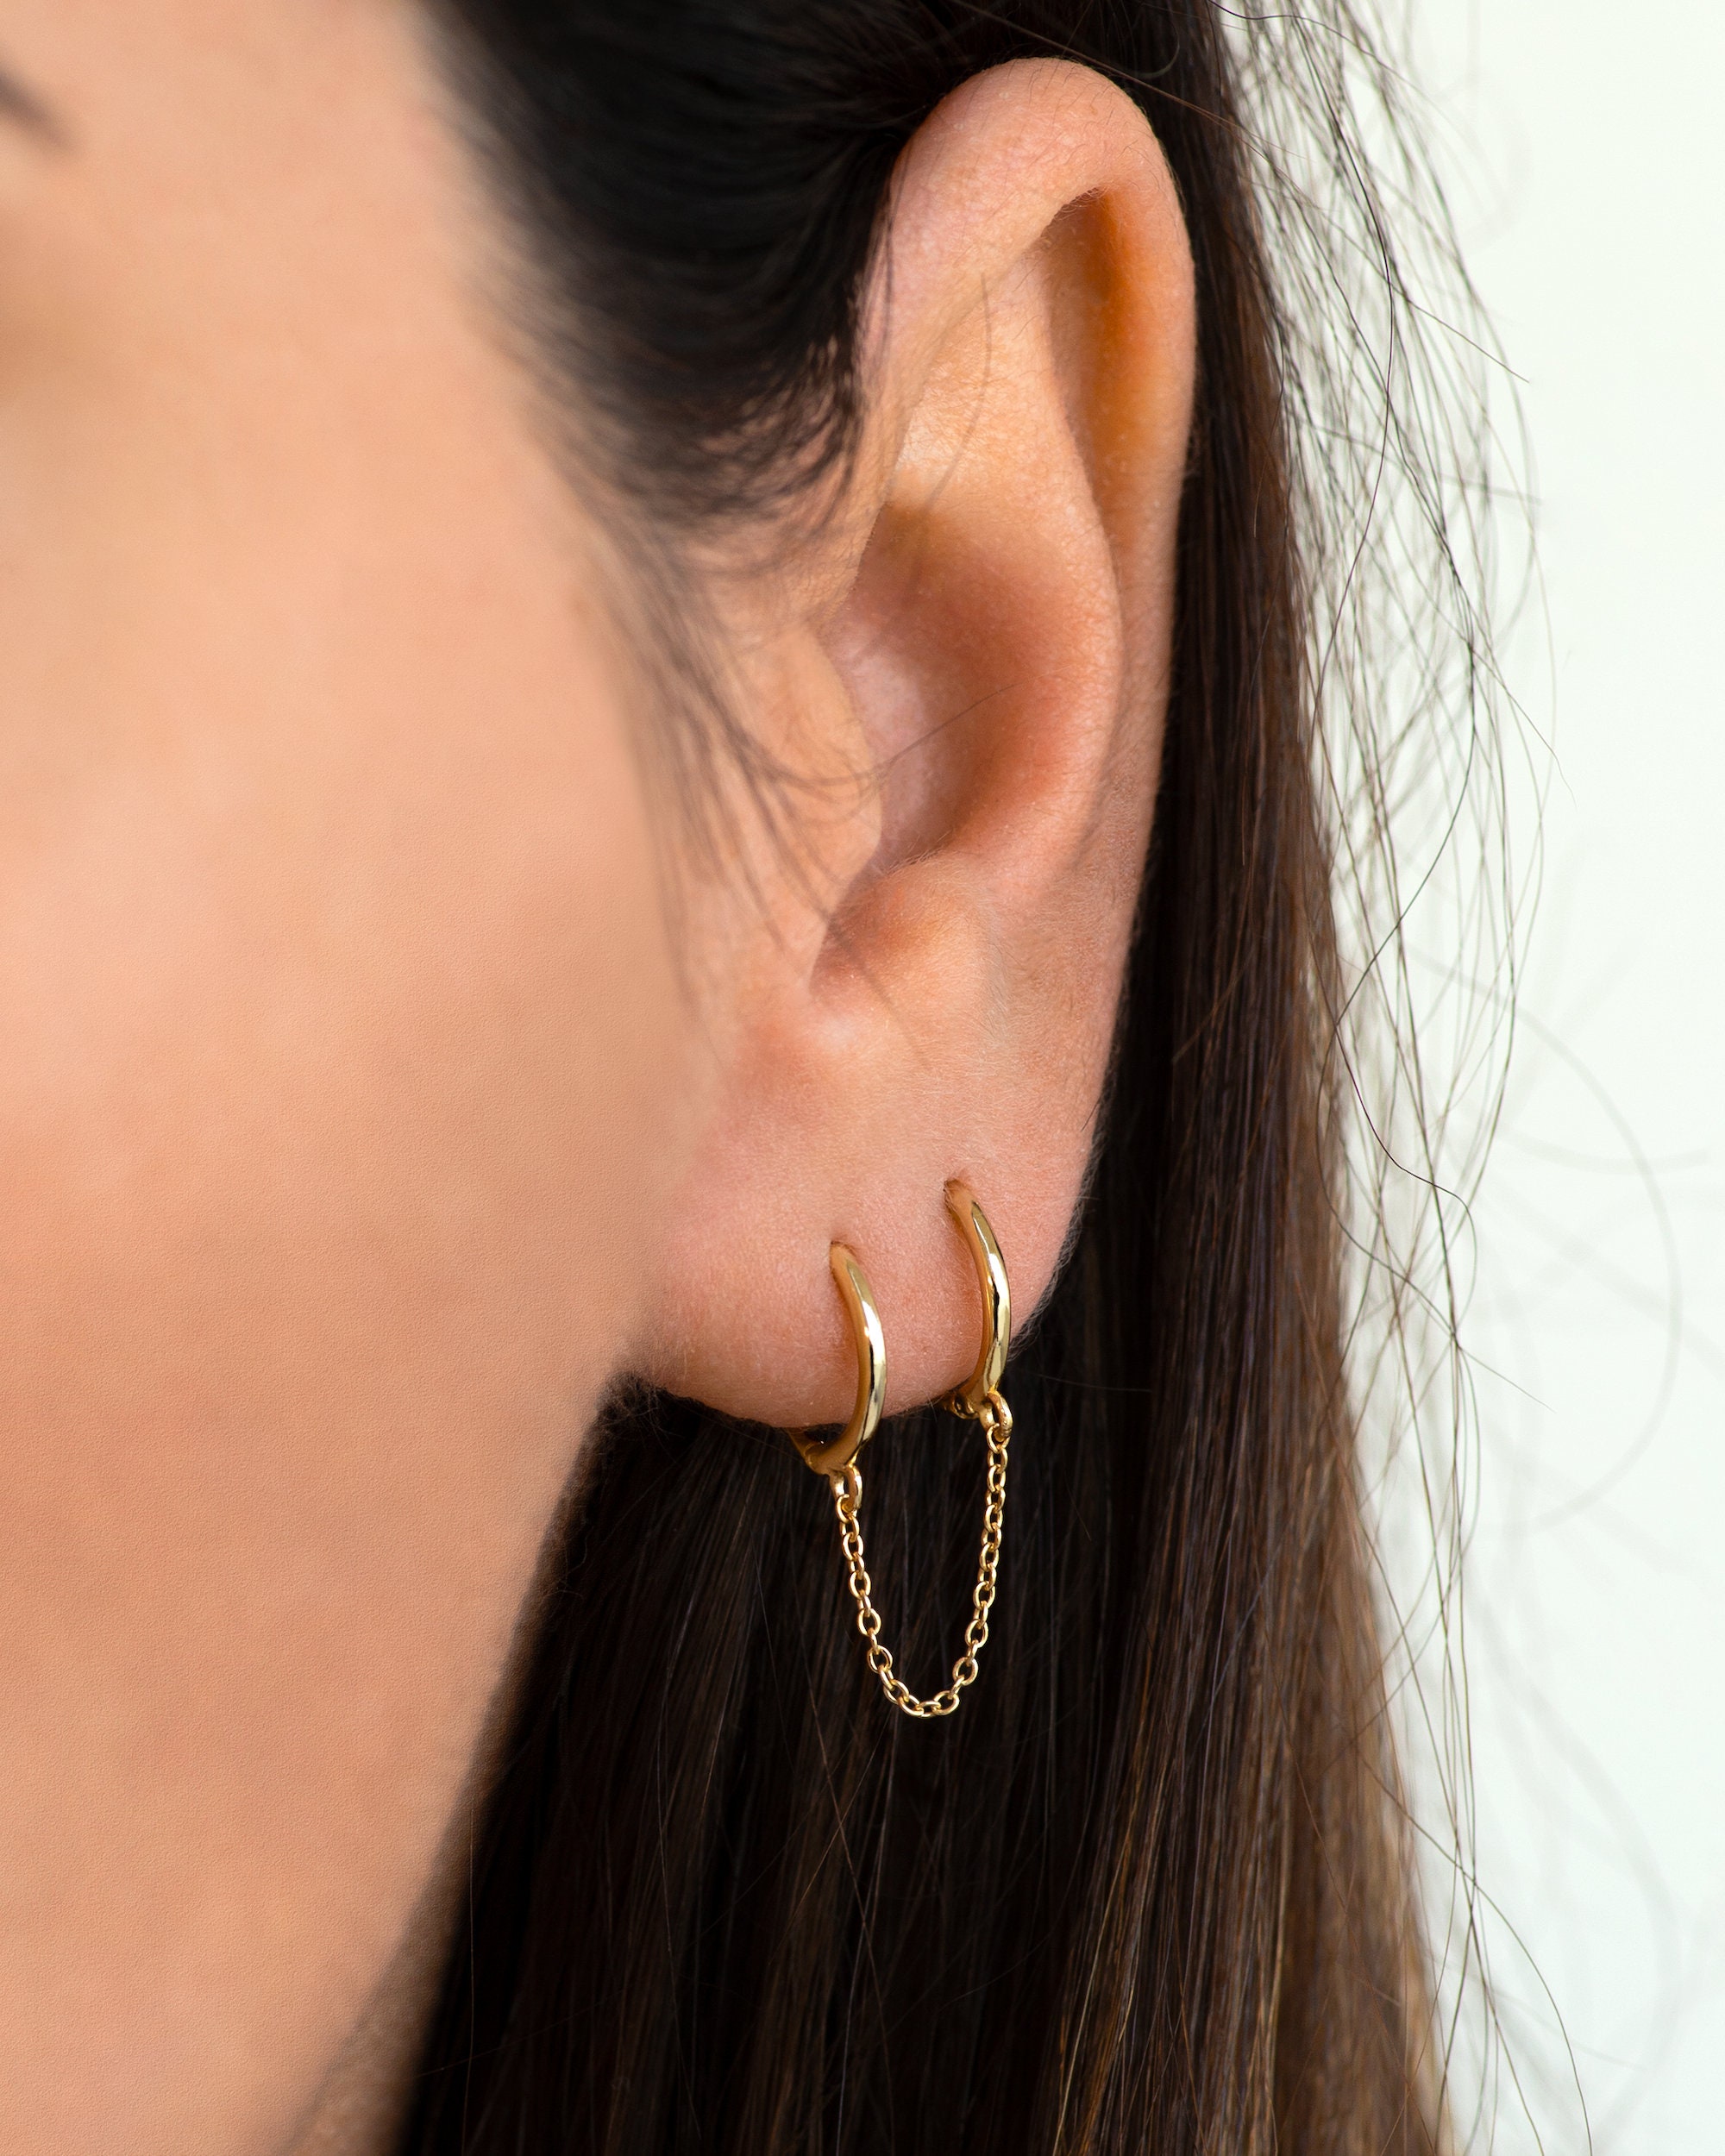 Ear Cuff with Hoops Attached for A Double Pierced Look .925 Sterling Silver Small Hoop Earrings Gold